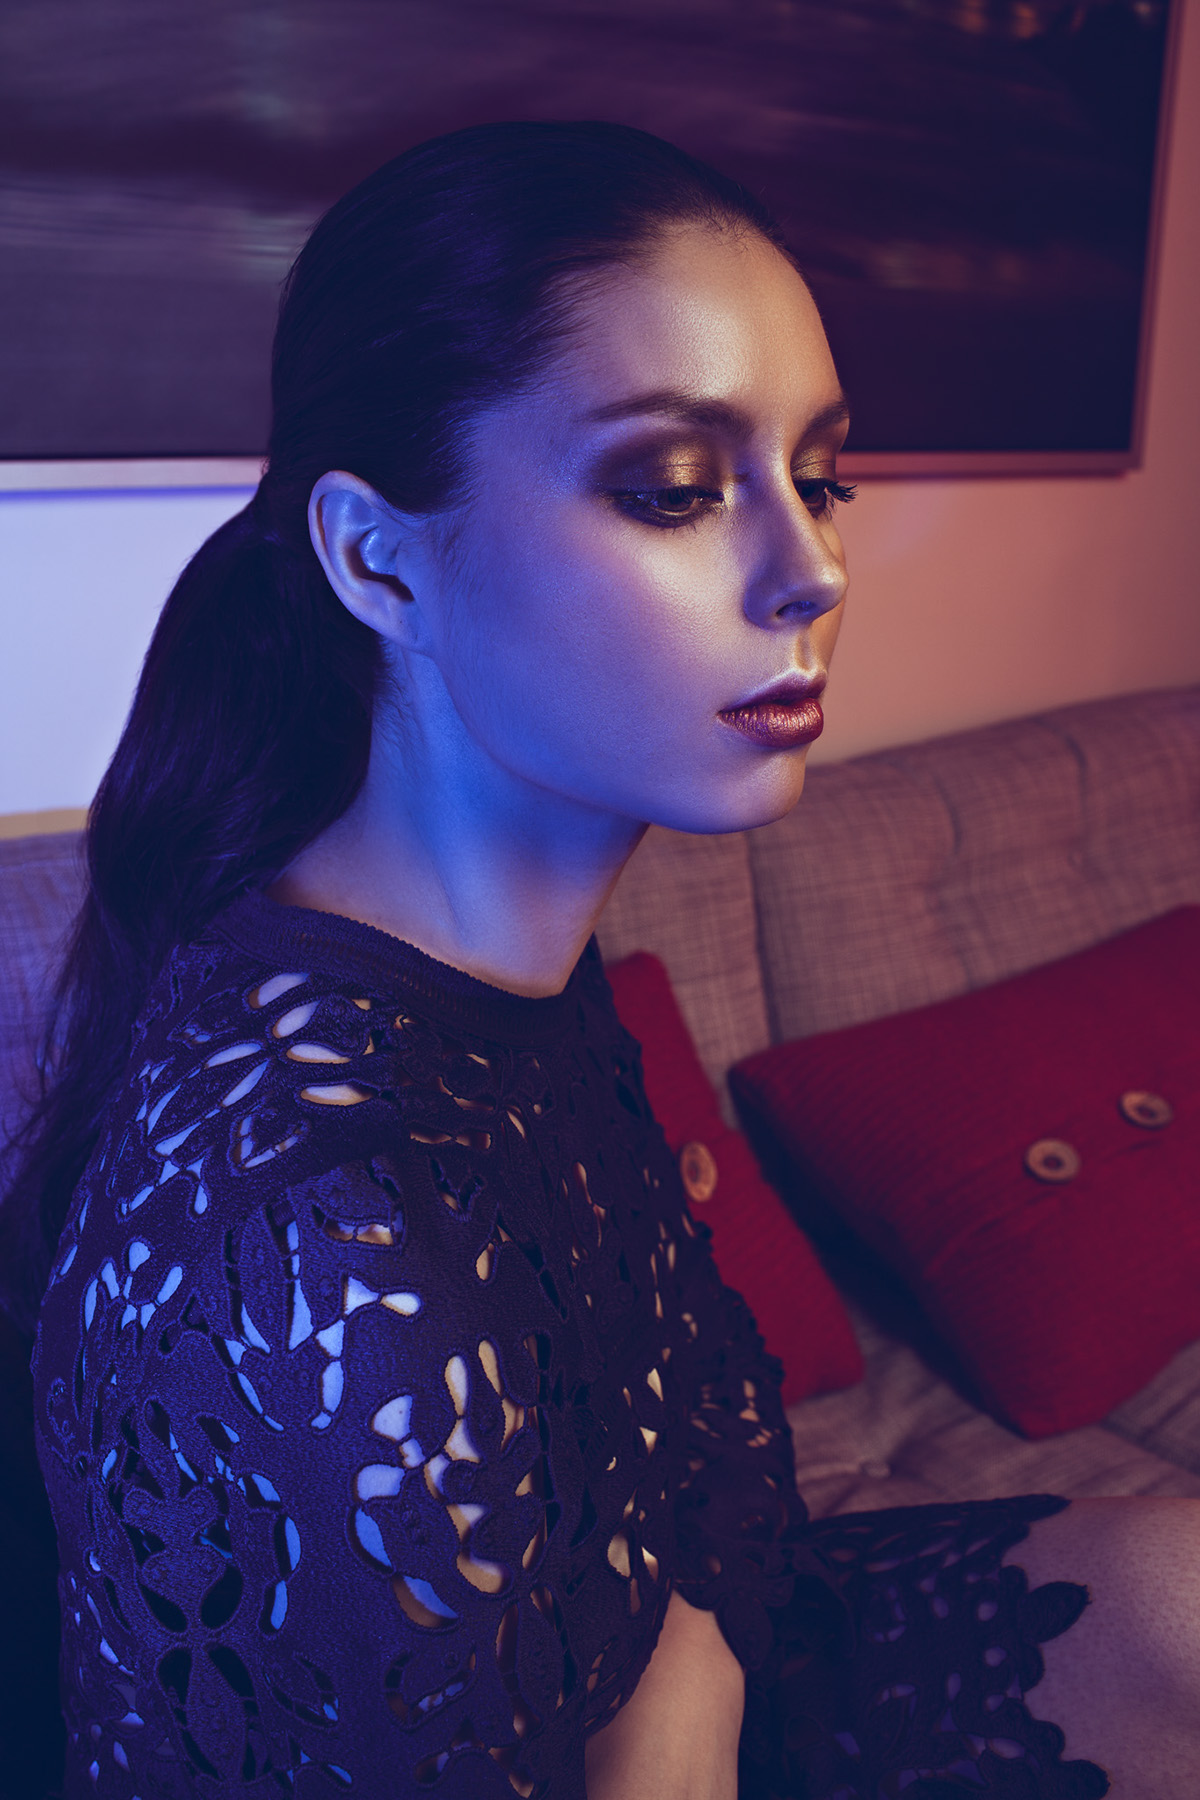 fashion editorial editorial story publication gels lighting strobes color ArtDirection